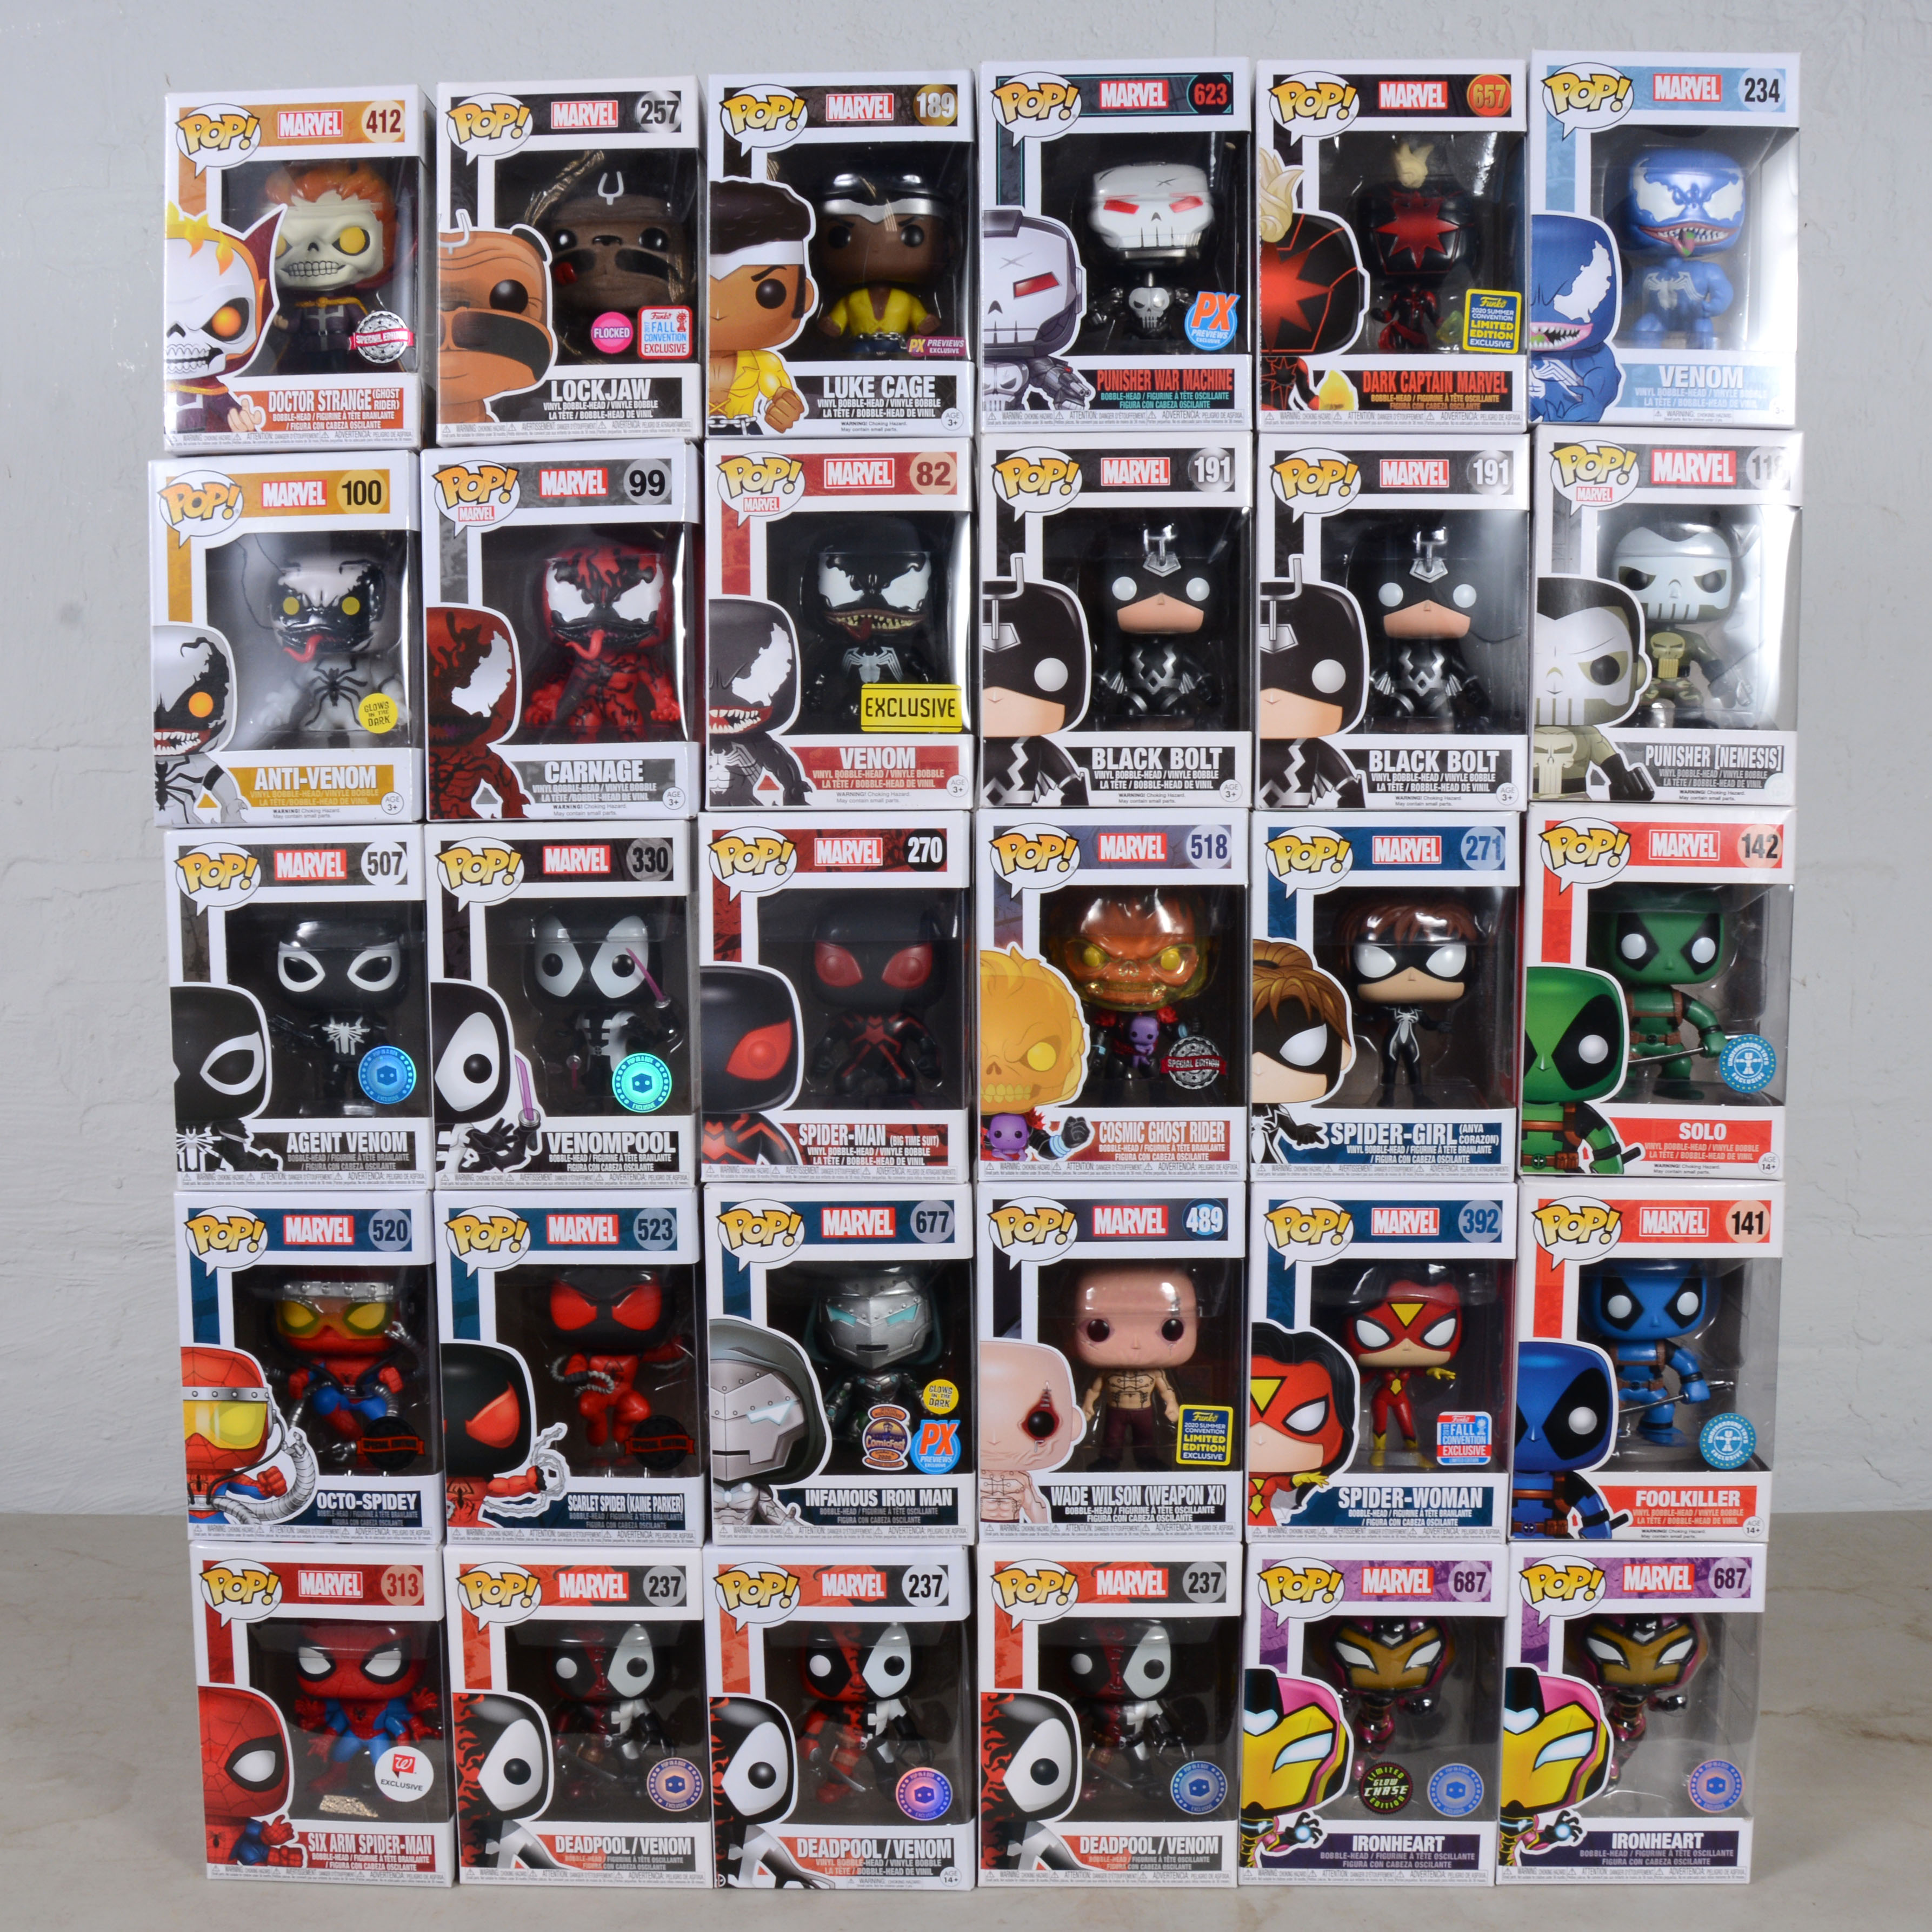 Funko Pop! thirty Marvel figures including 507 Agent Venom and others.